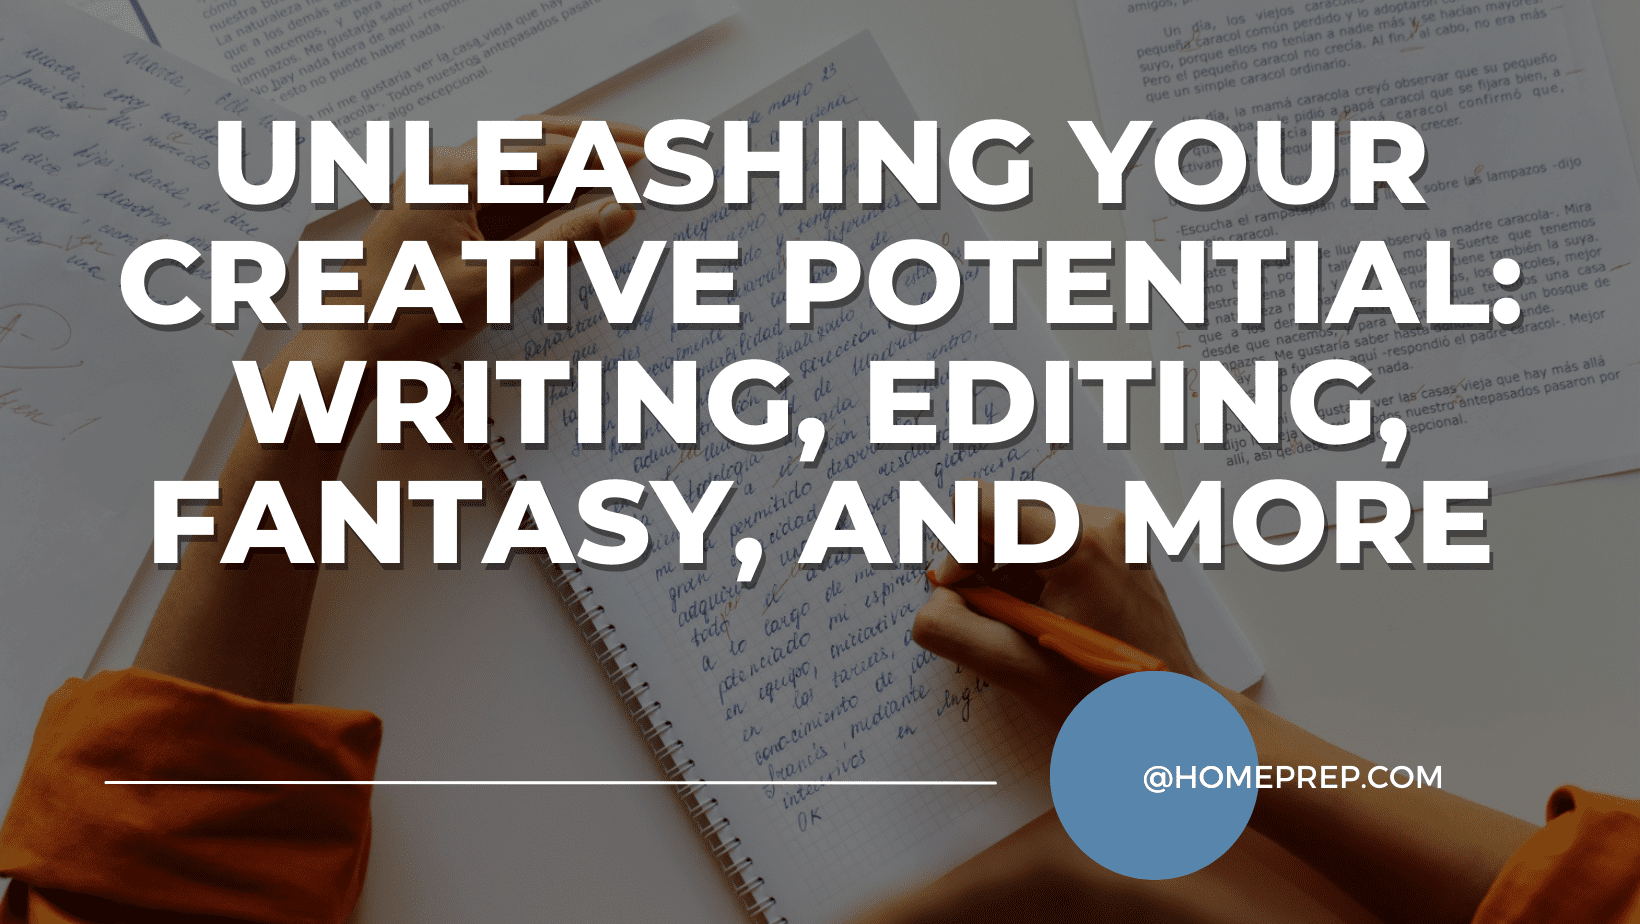 Unleashing Your Creative Potential: Writing, Editing, Fantasy, and More with @HomePrep